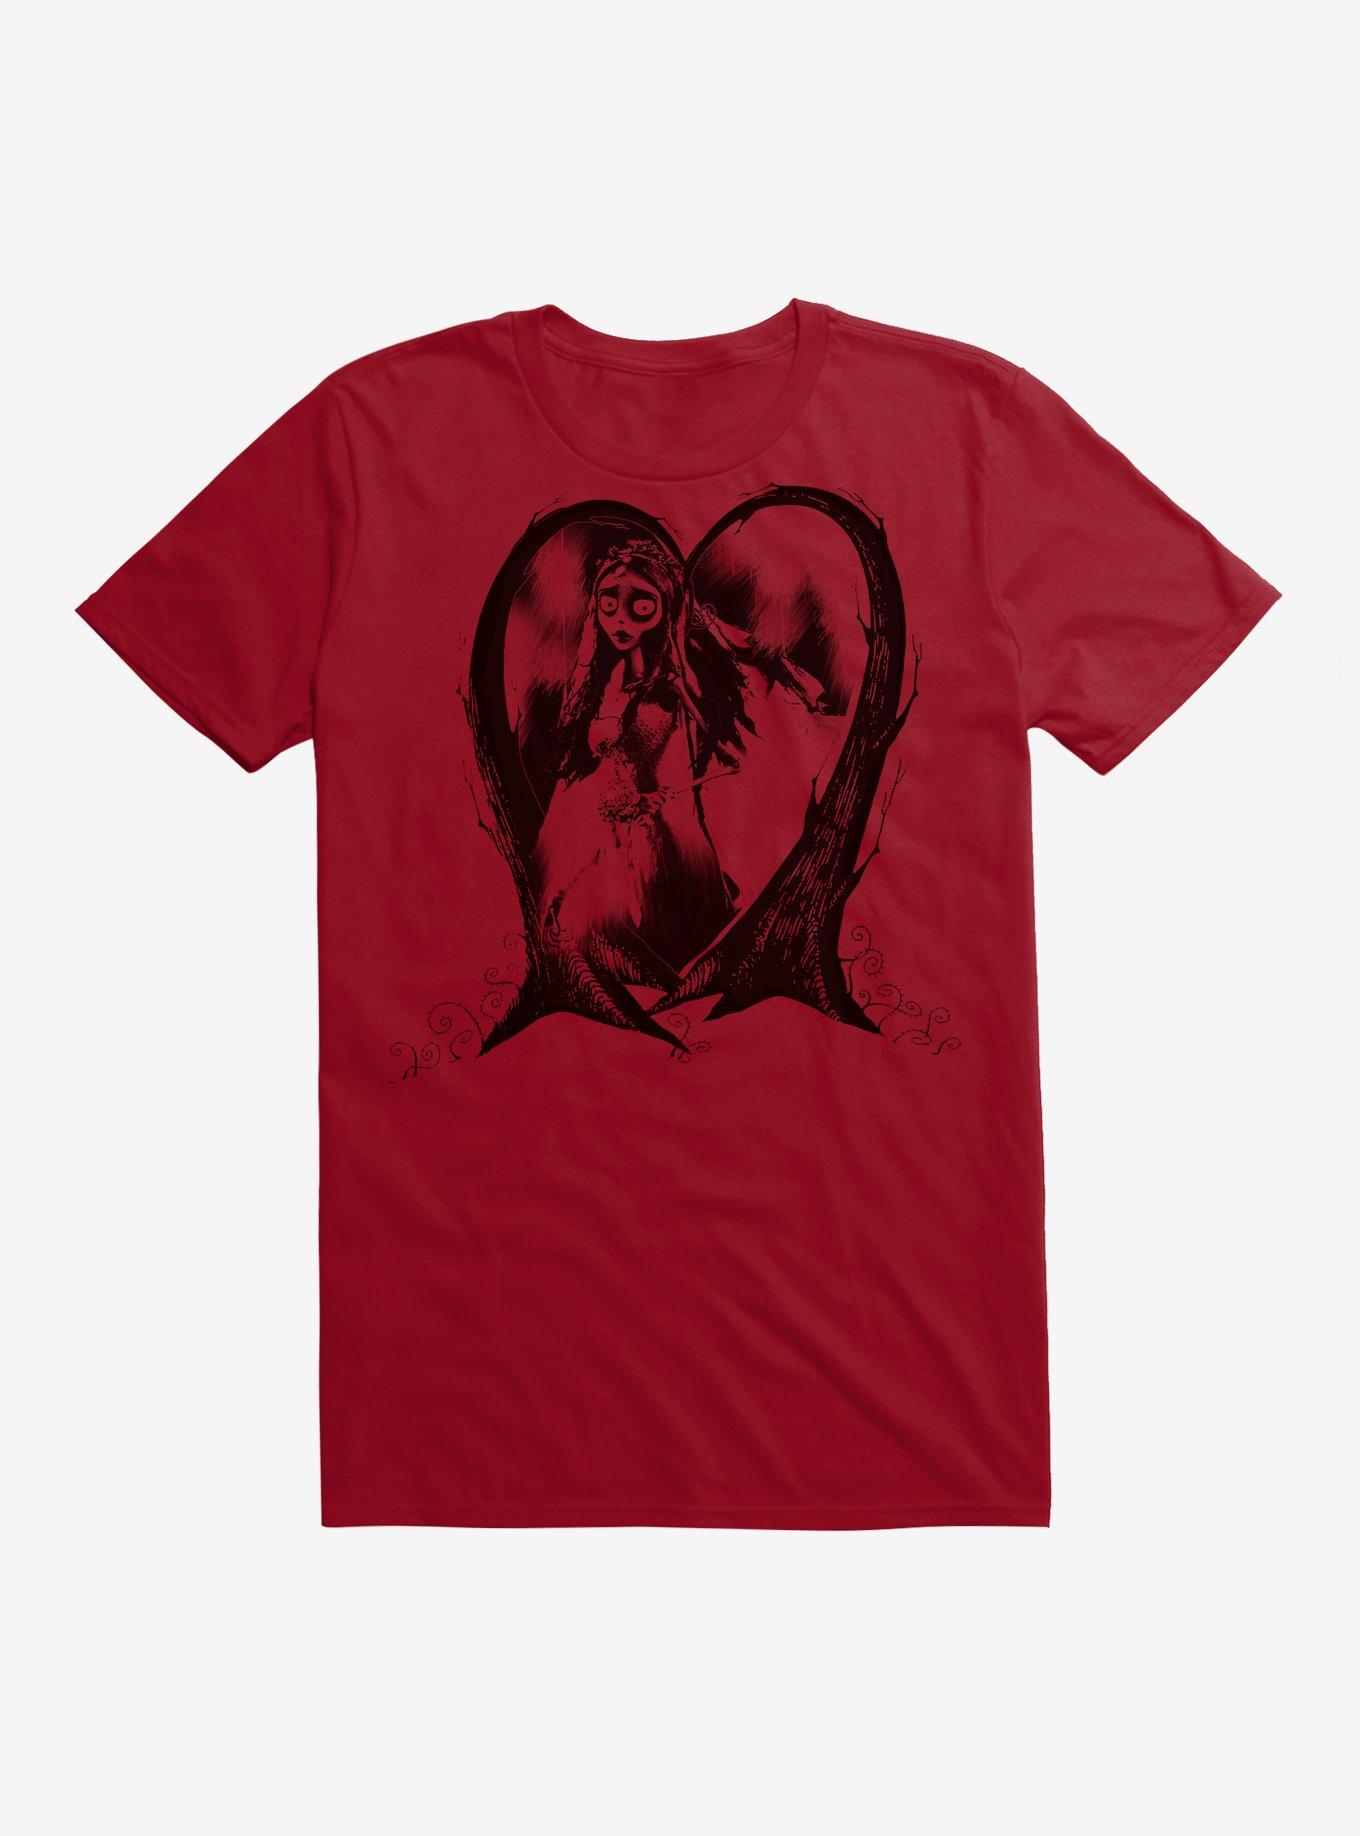 Corpse Bride Emily Forest Walk T-Shirt, INDEPENDENCE RED, hi-res